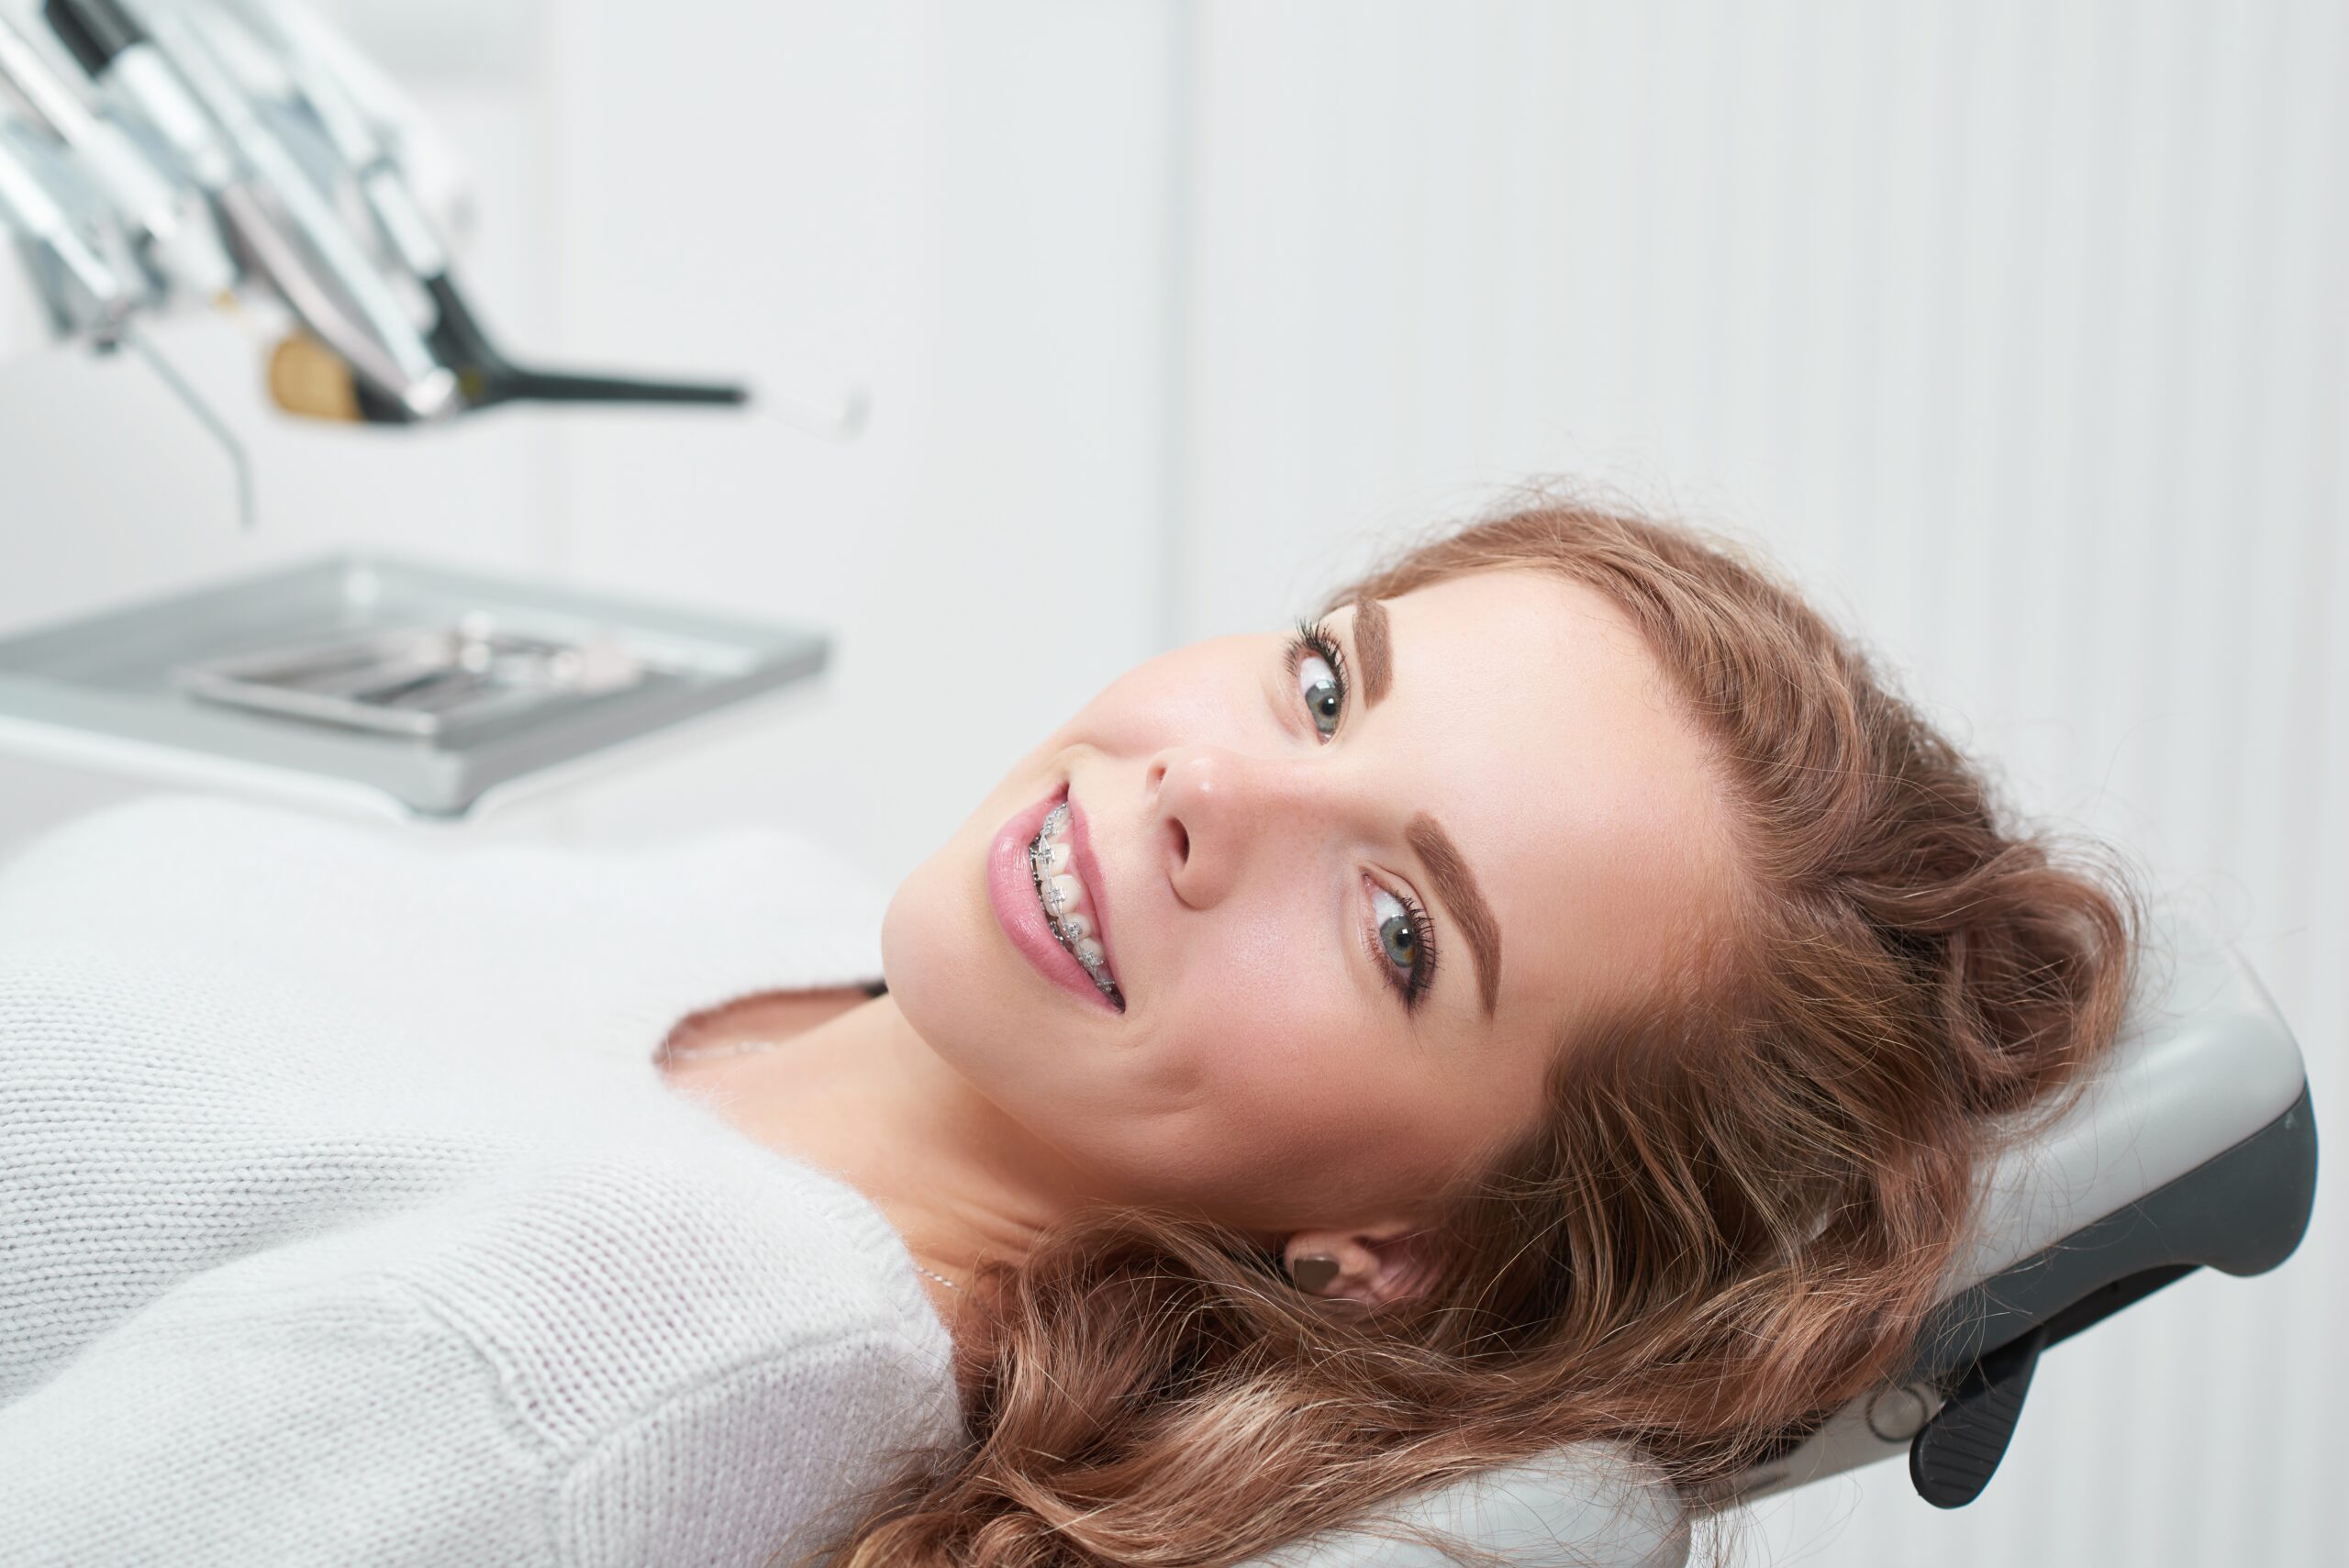 THE BEST AGE FOR DENTAL IMPLANTS IN TURKEY